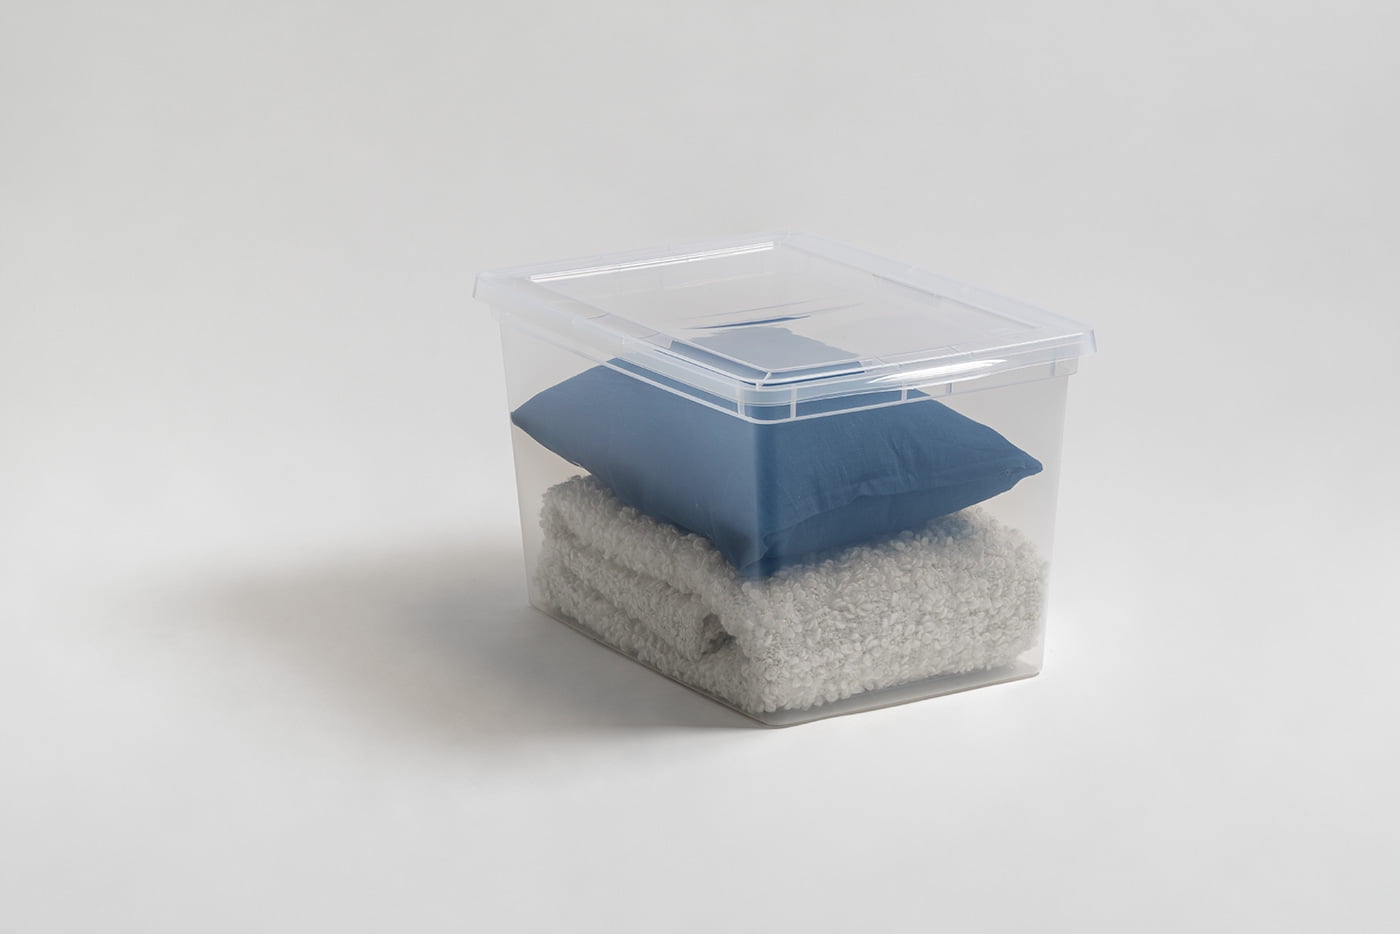 17 qt. Snap Top Plastic Storage Box in Clear with Gray Lid 500218